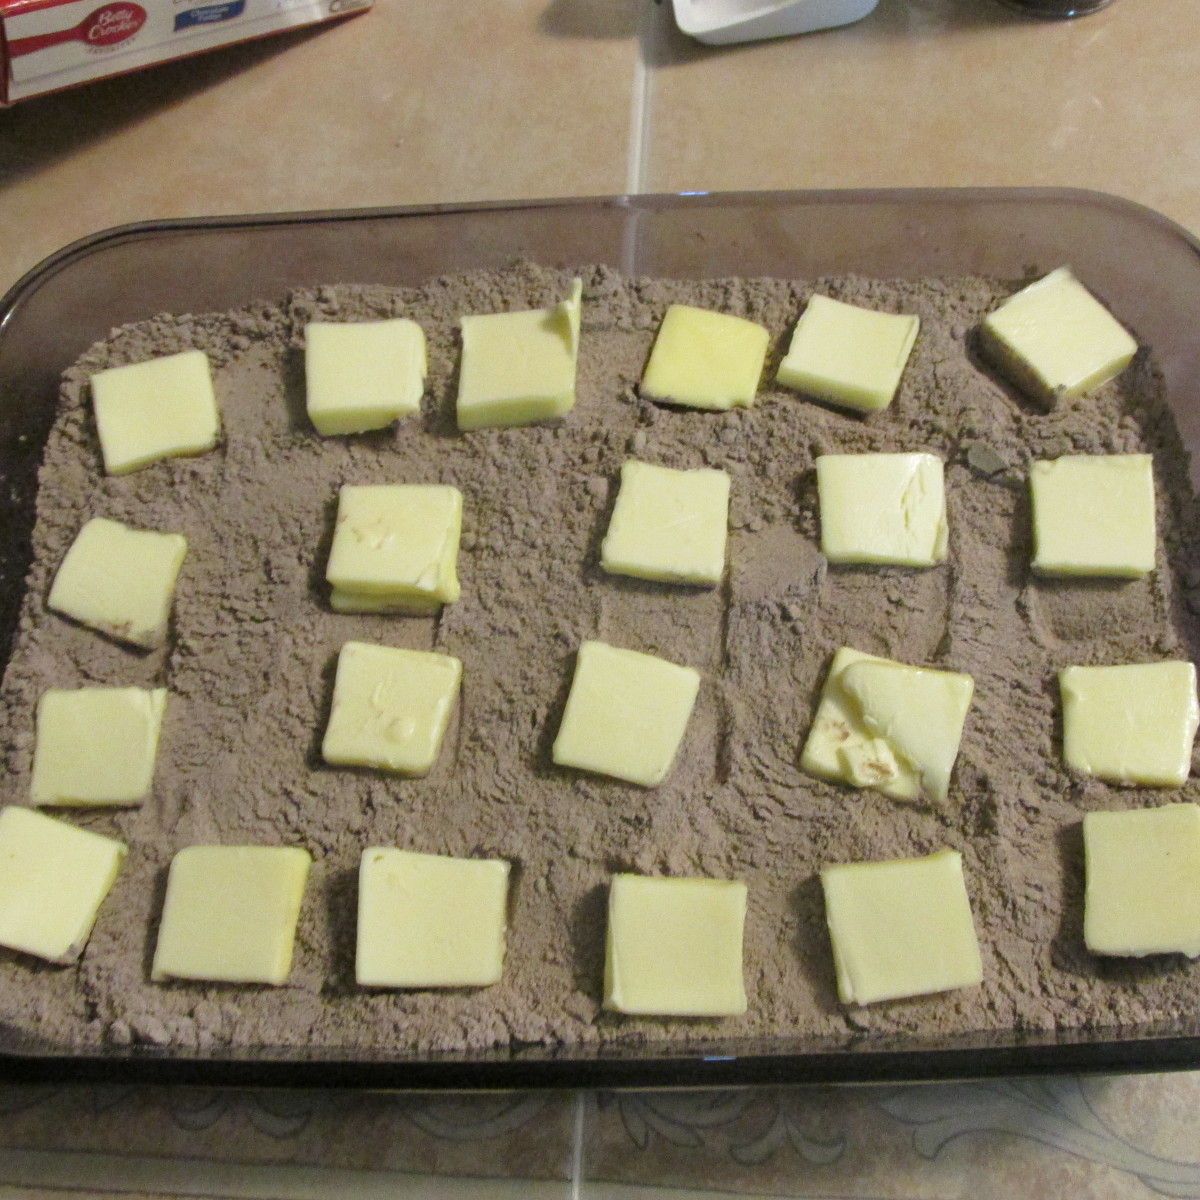 3rd layer, the butter